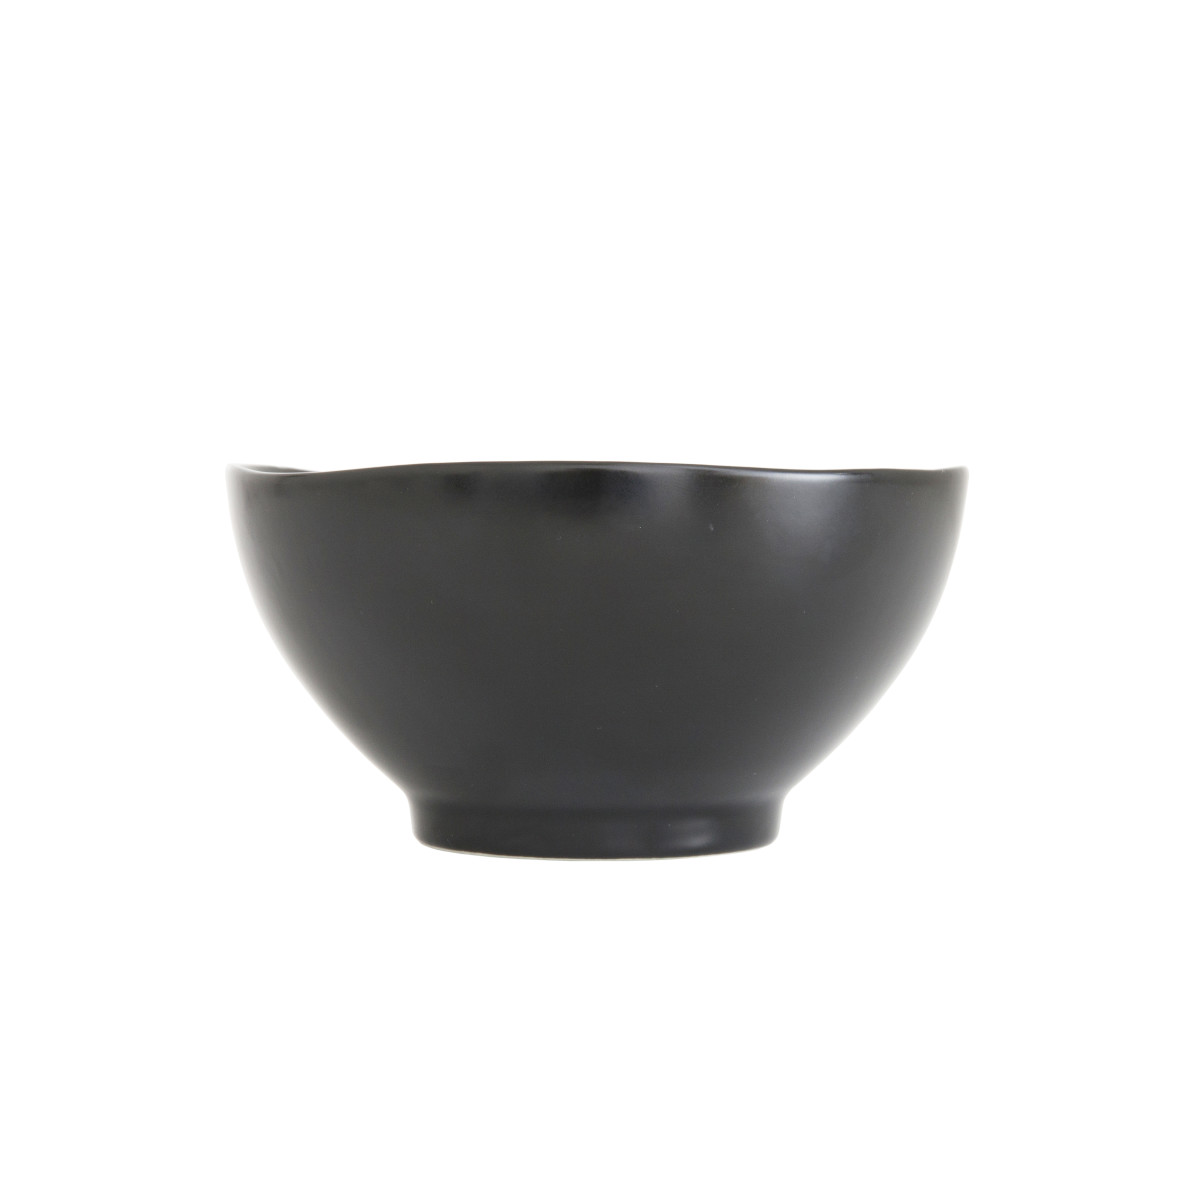 Heirloom Tall Bowl, Charcoal, Set of 4